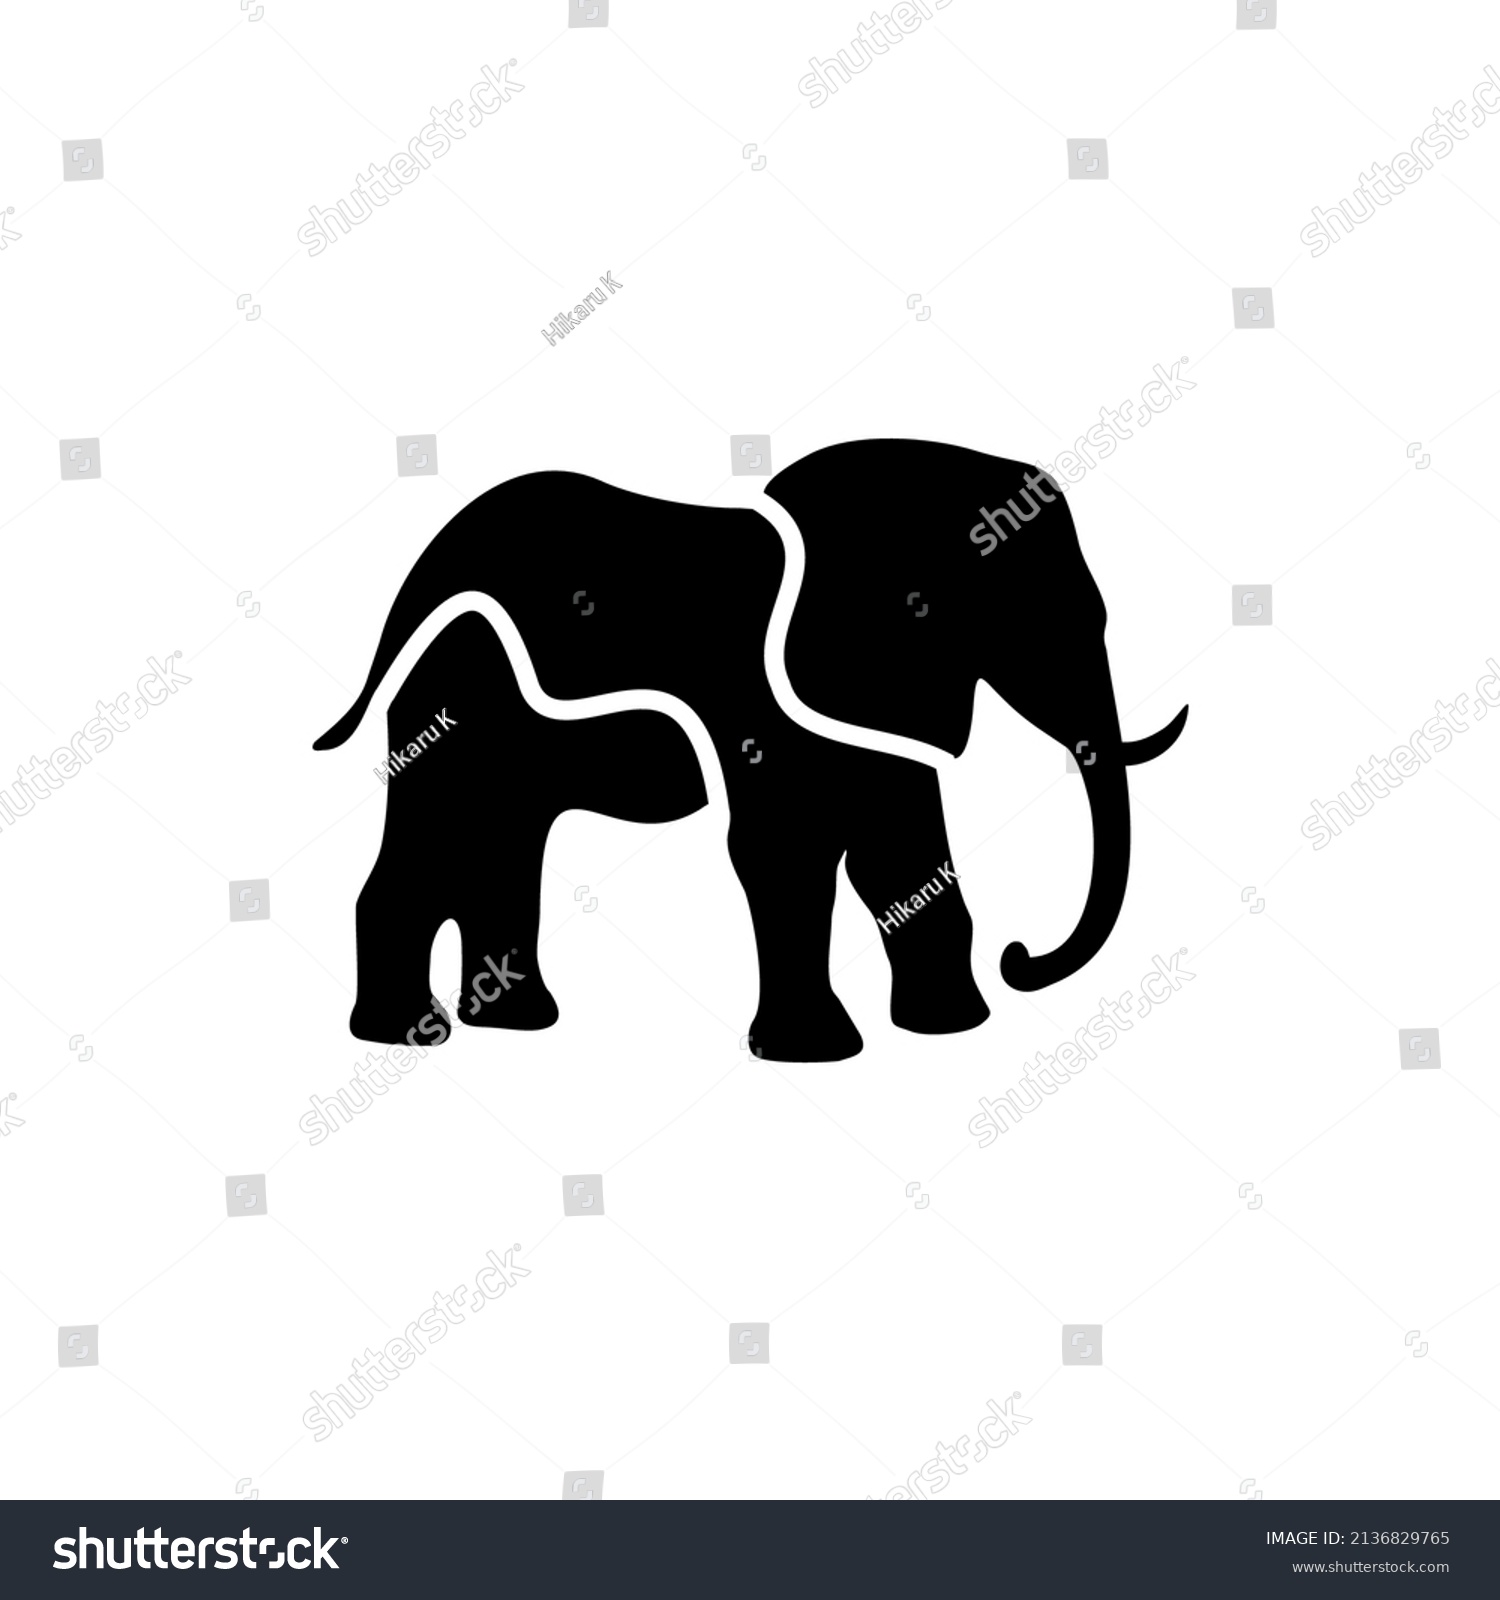 SVG of elephant ivory silhouette with black and white 3 line style that is beautiful and full of meaning svg